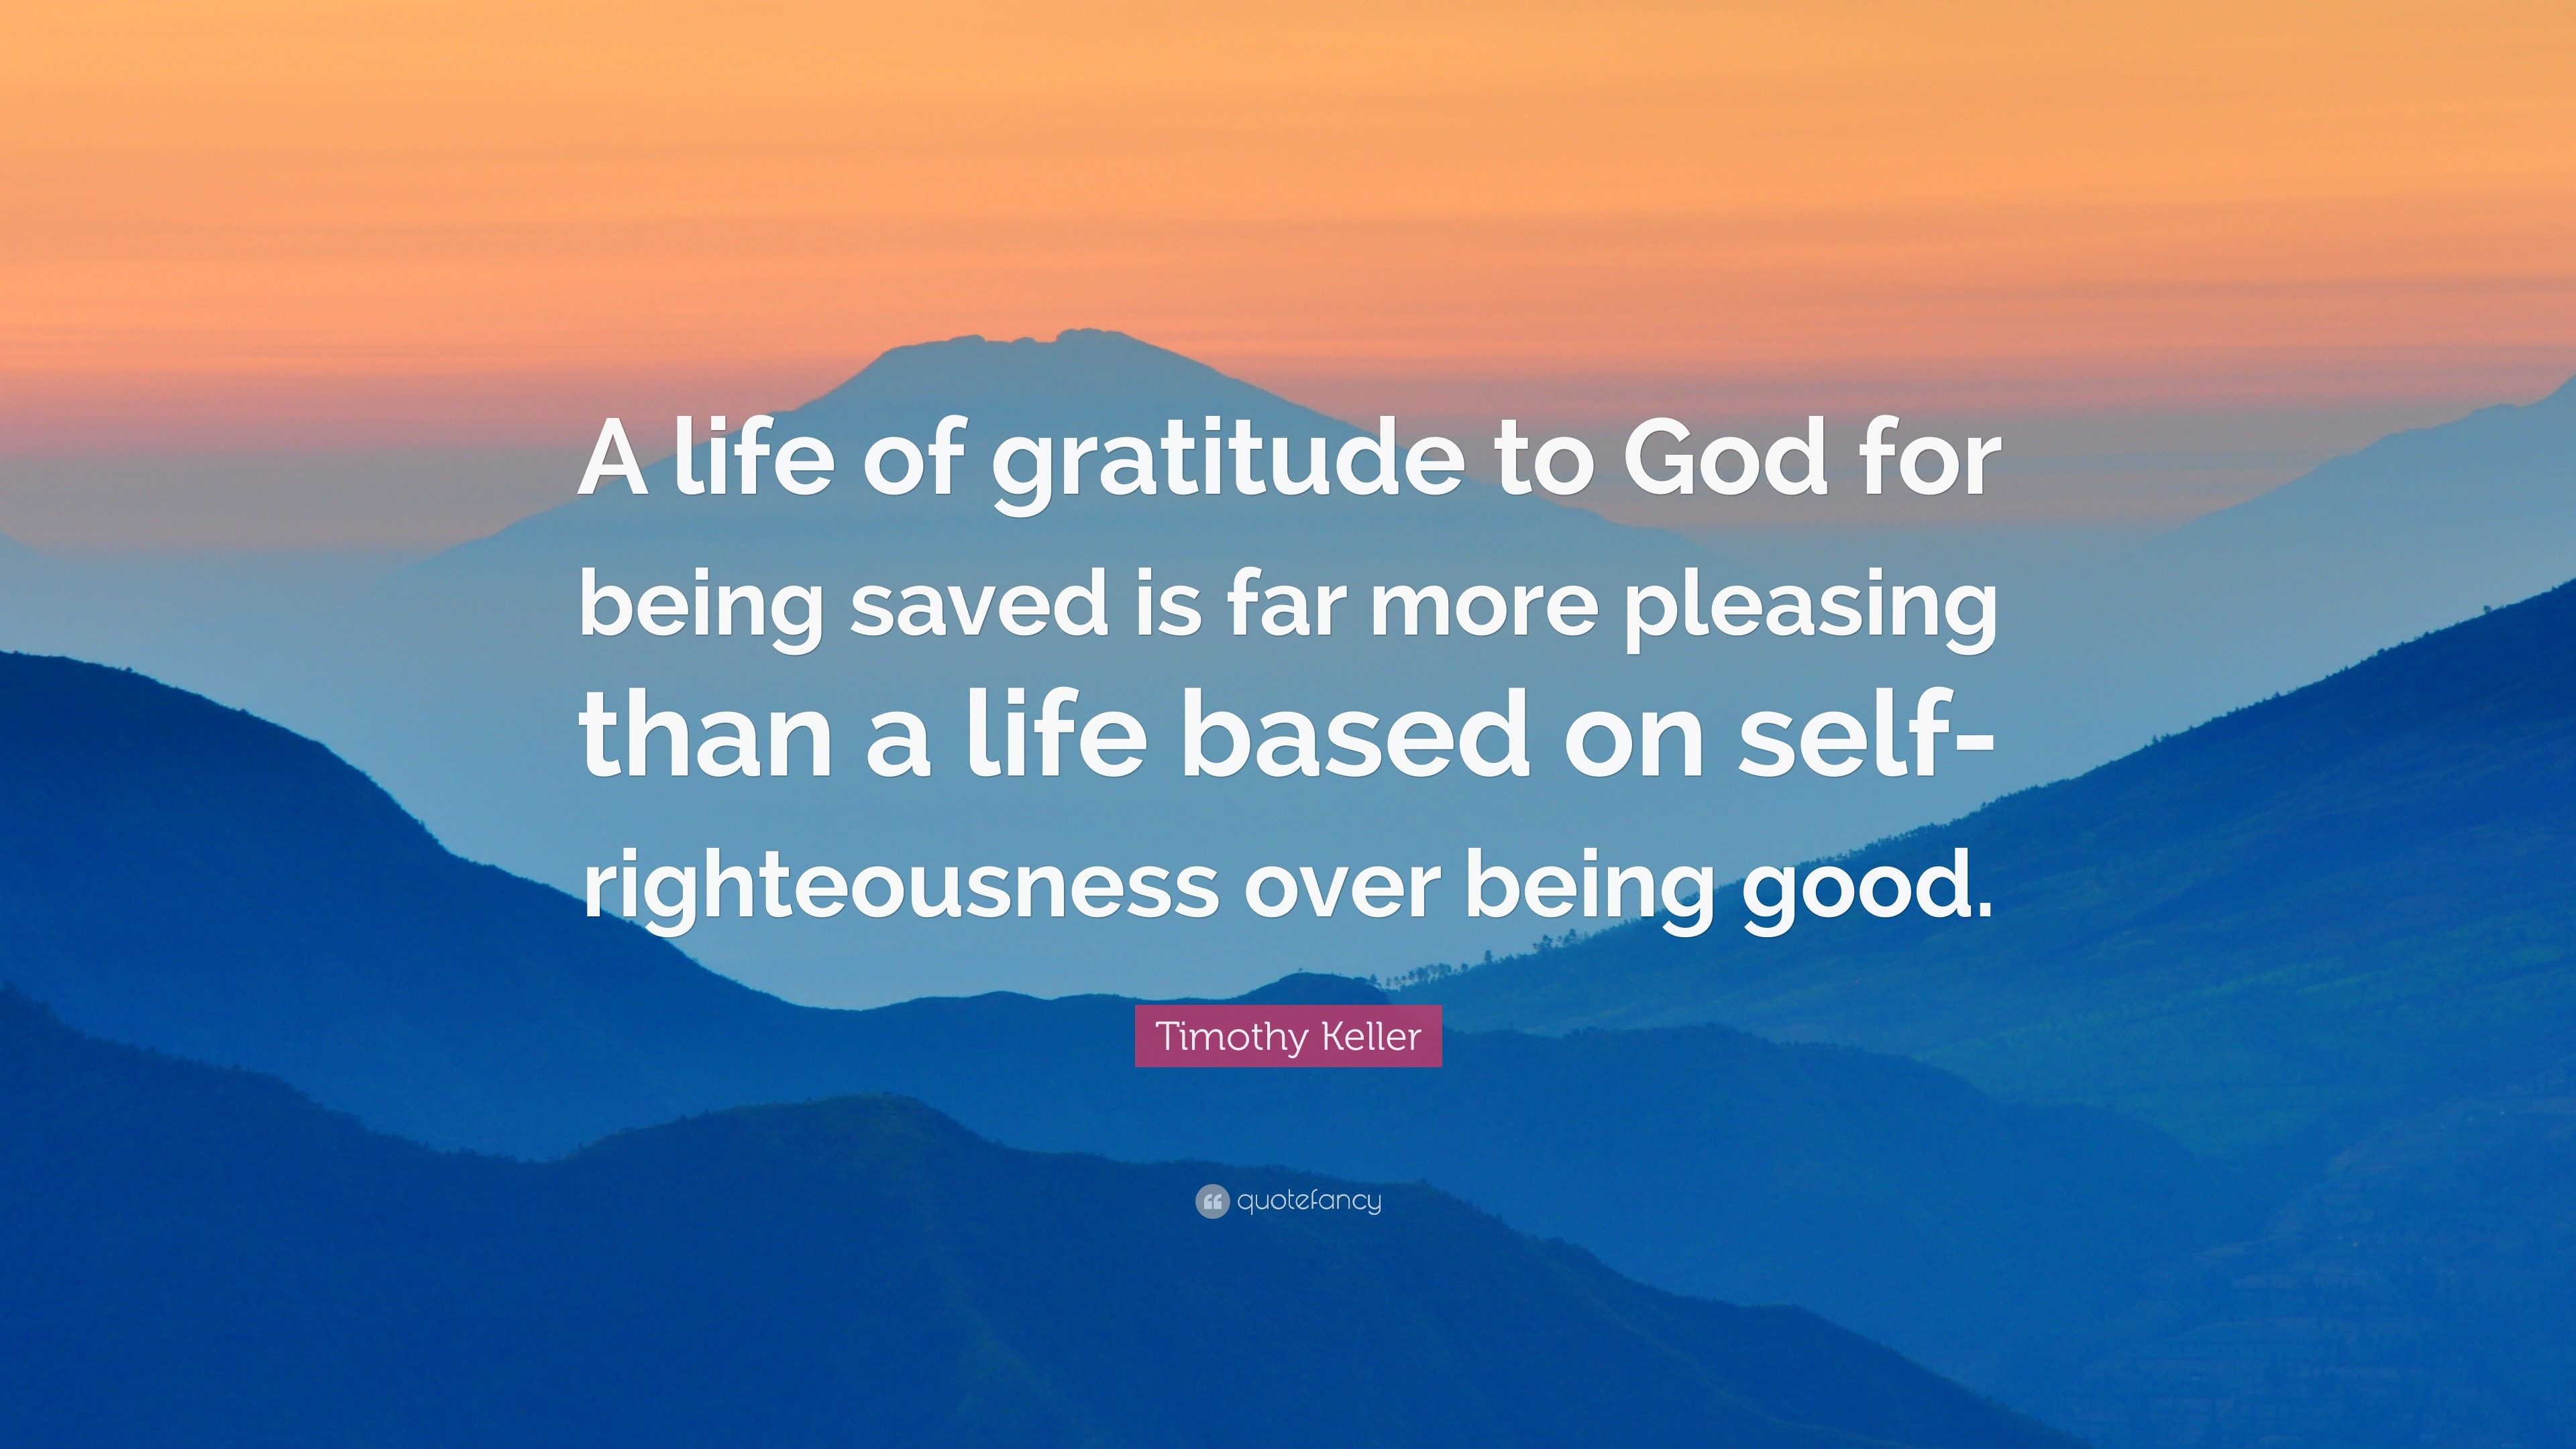 Timothy Keller Quote: “A life of gratitude to God for being saved is ...